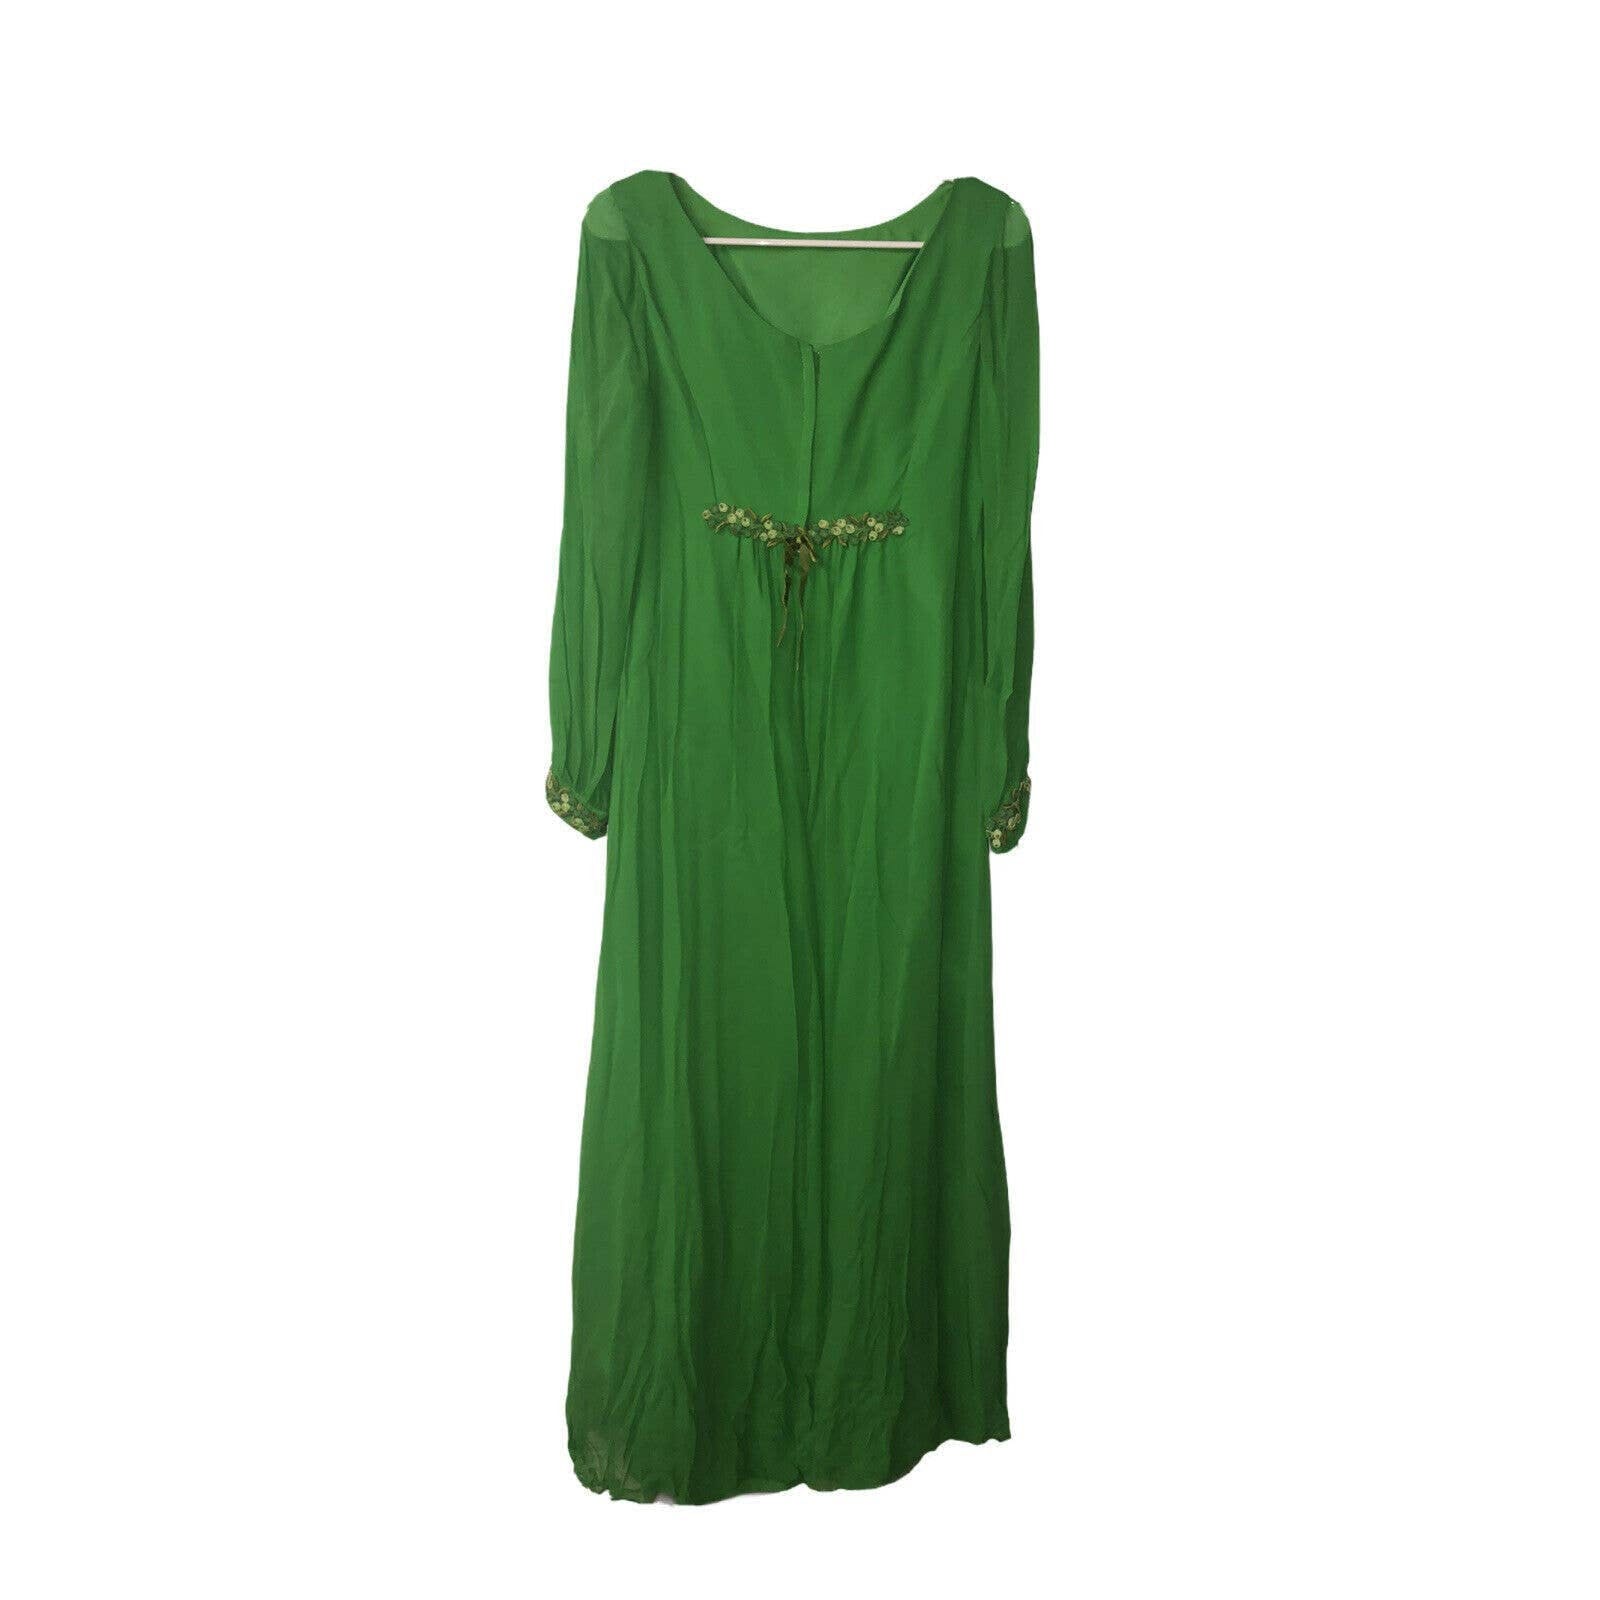 Vintage 60's Bright Green Gown with Sheer Sleeves | Shop THRILLING